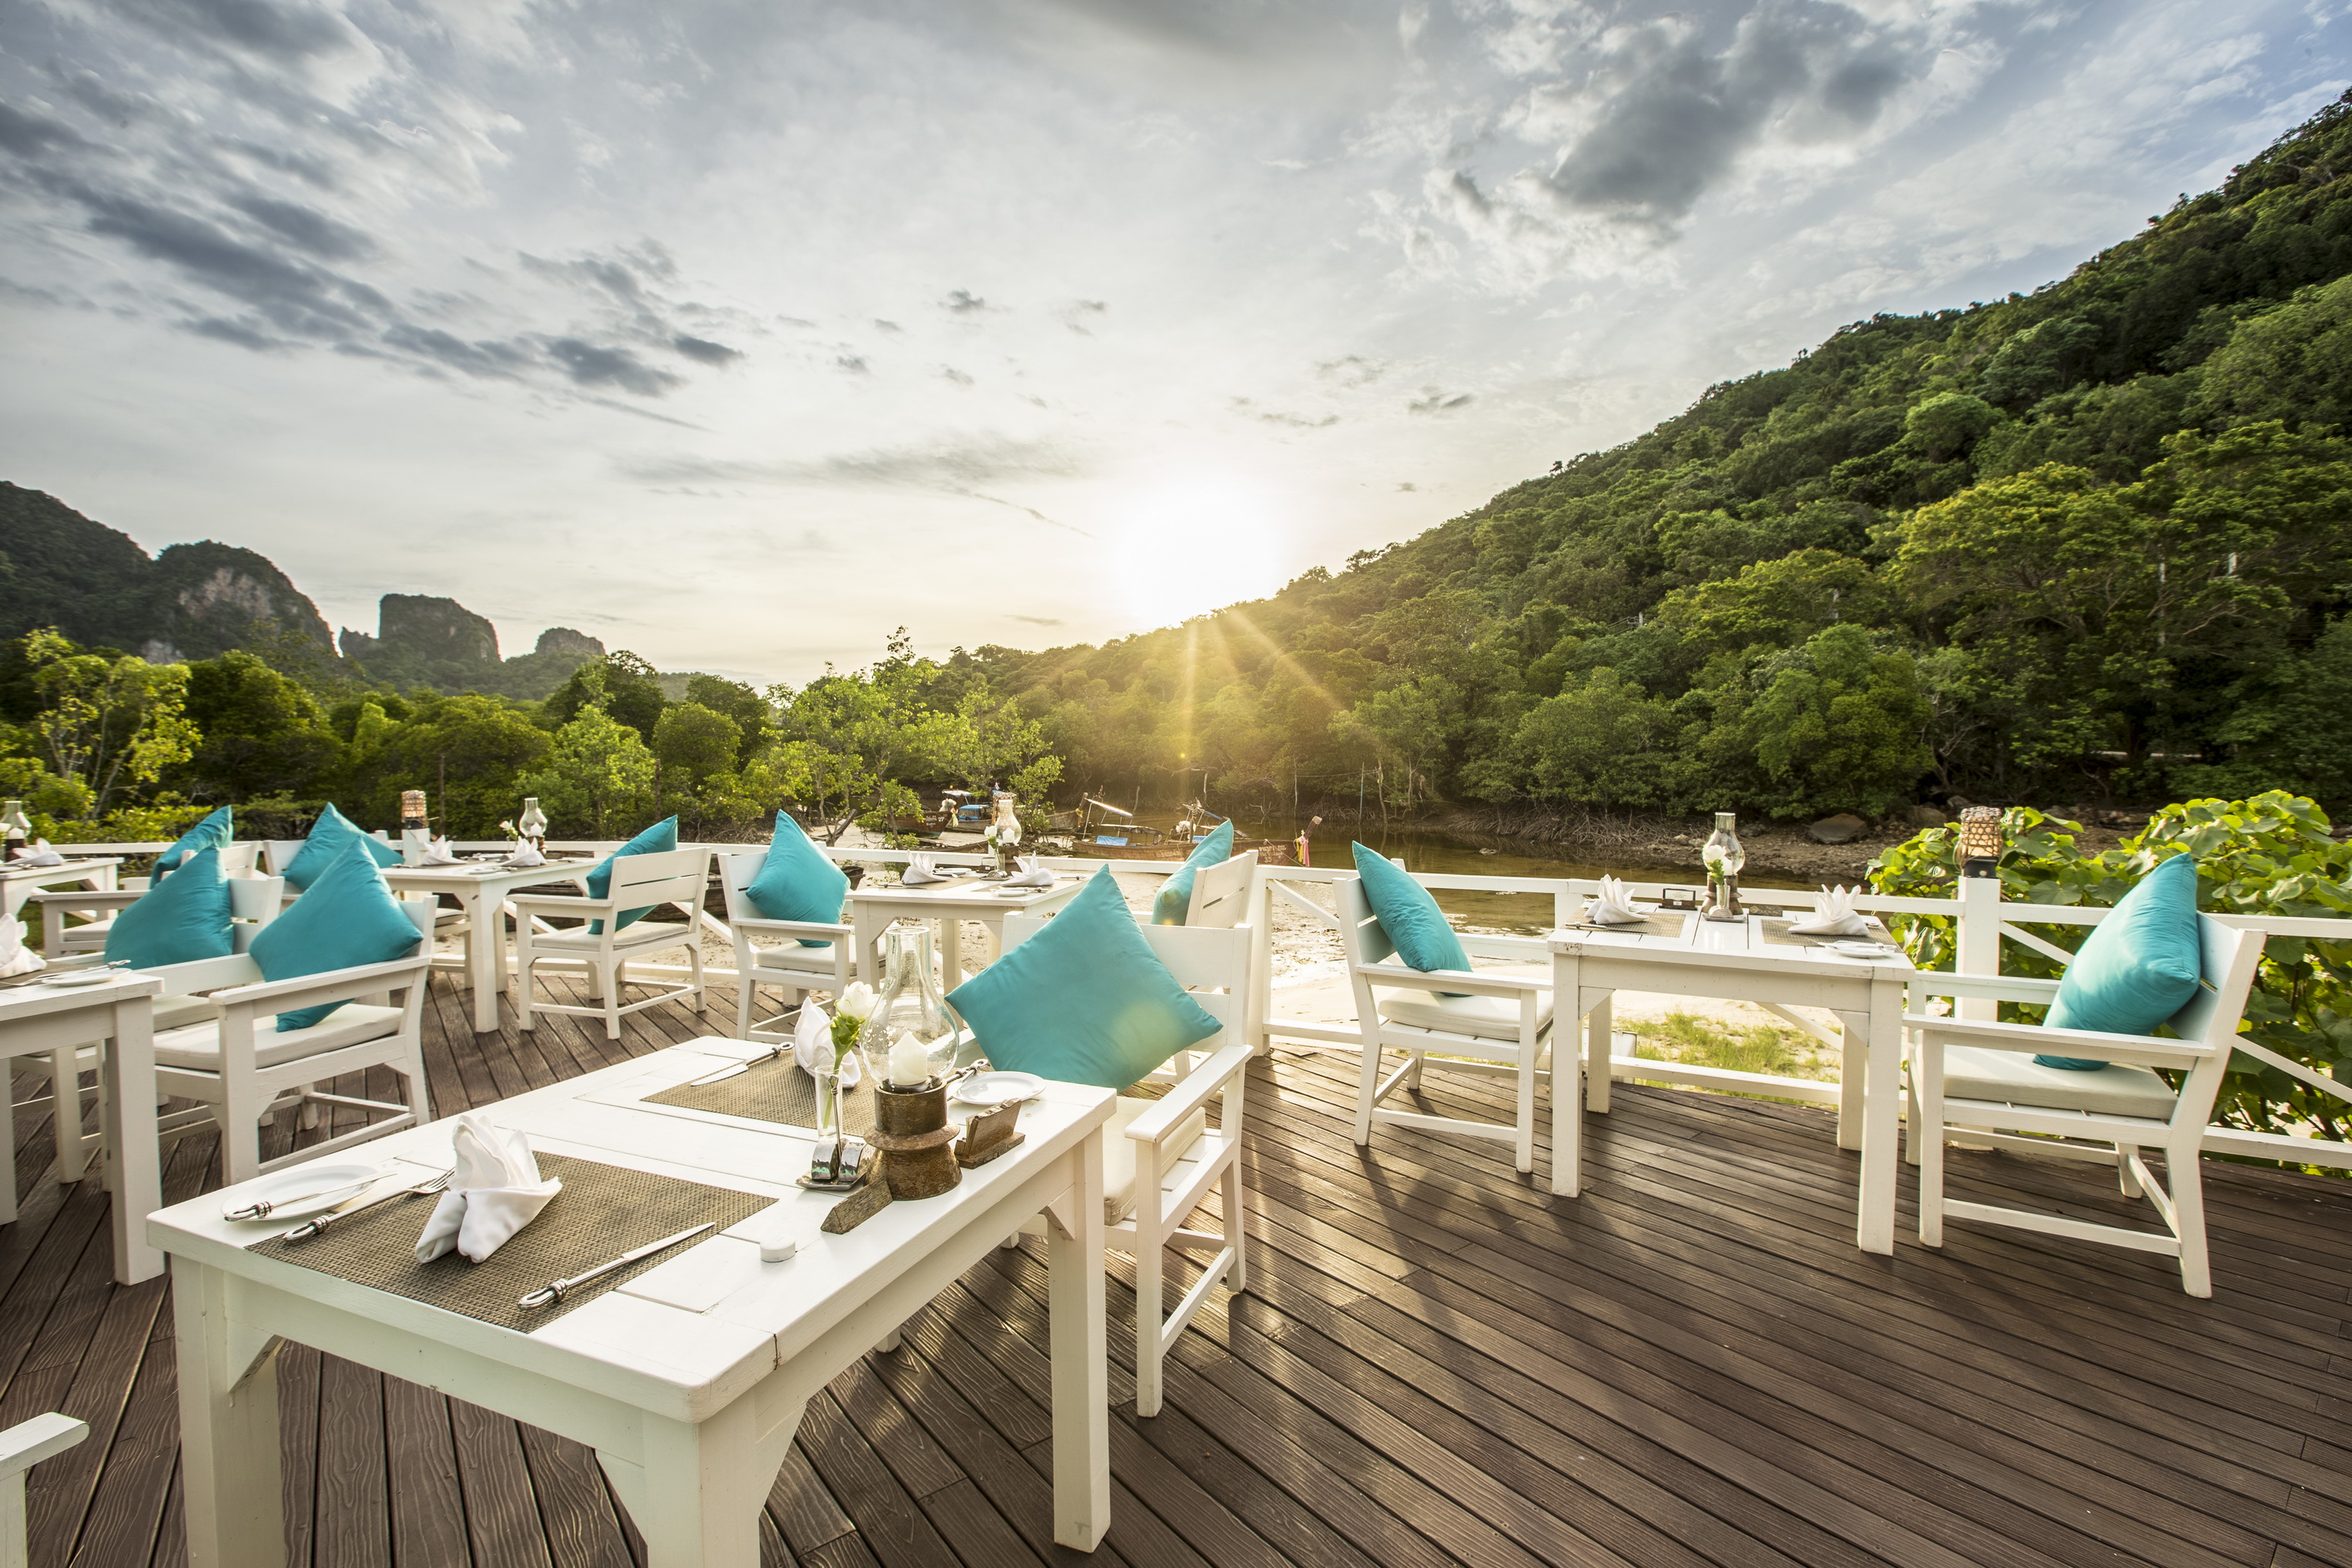 Phi Phi Island Village Beach Resort – All-Inclusive F&B Experience With All-Day Free-Flow